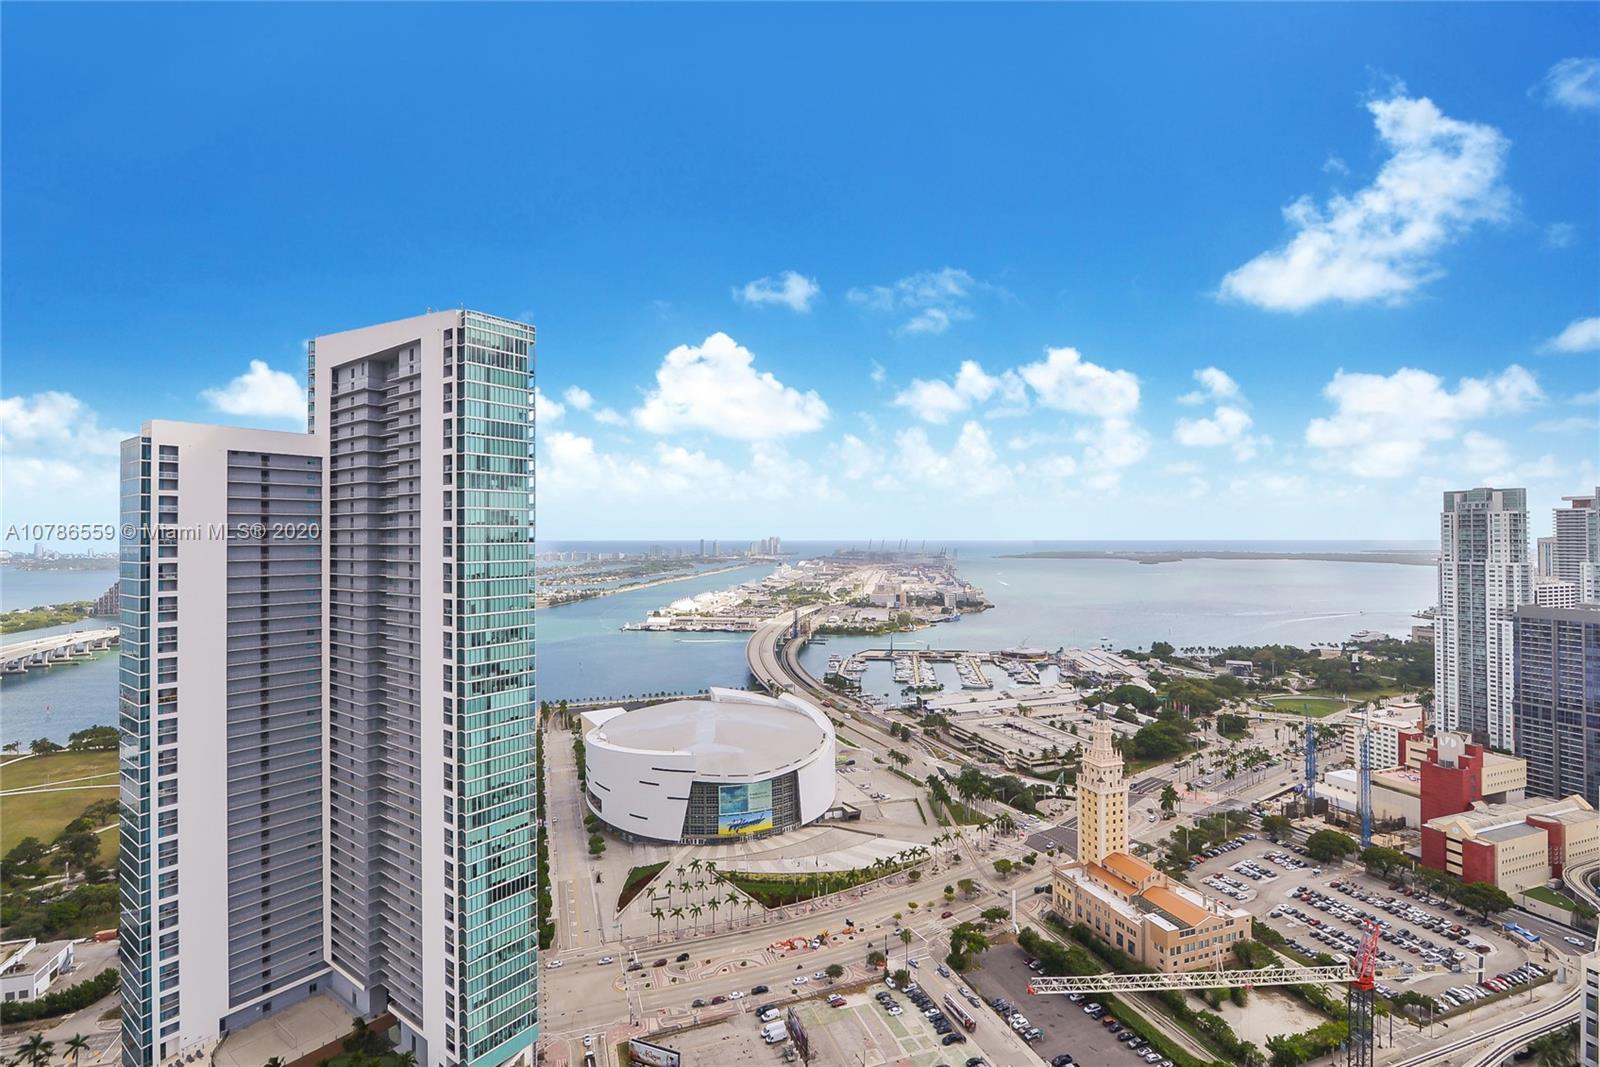 BRAND NEW LUXURY PARAMOUNT MIAMI WORLD CENTER : 3 Beds + den /4 Baths 10 Ft ceilings / Private eleva